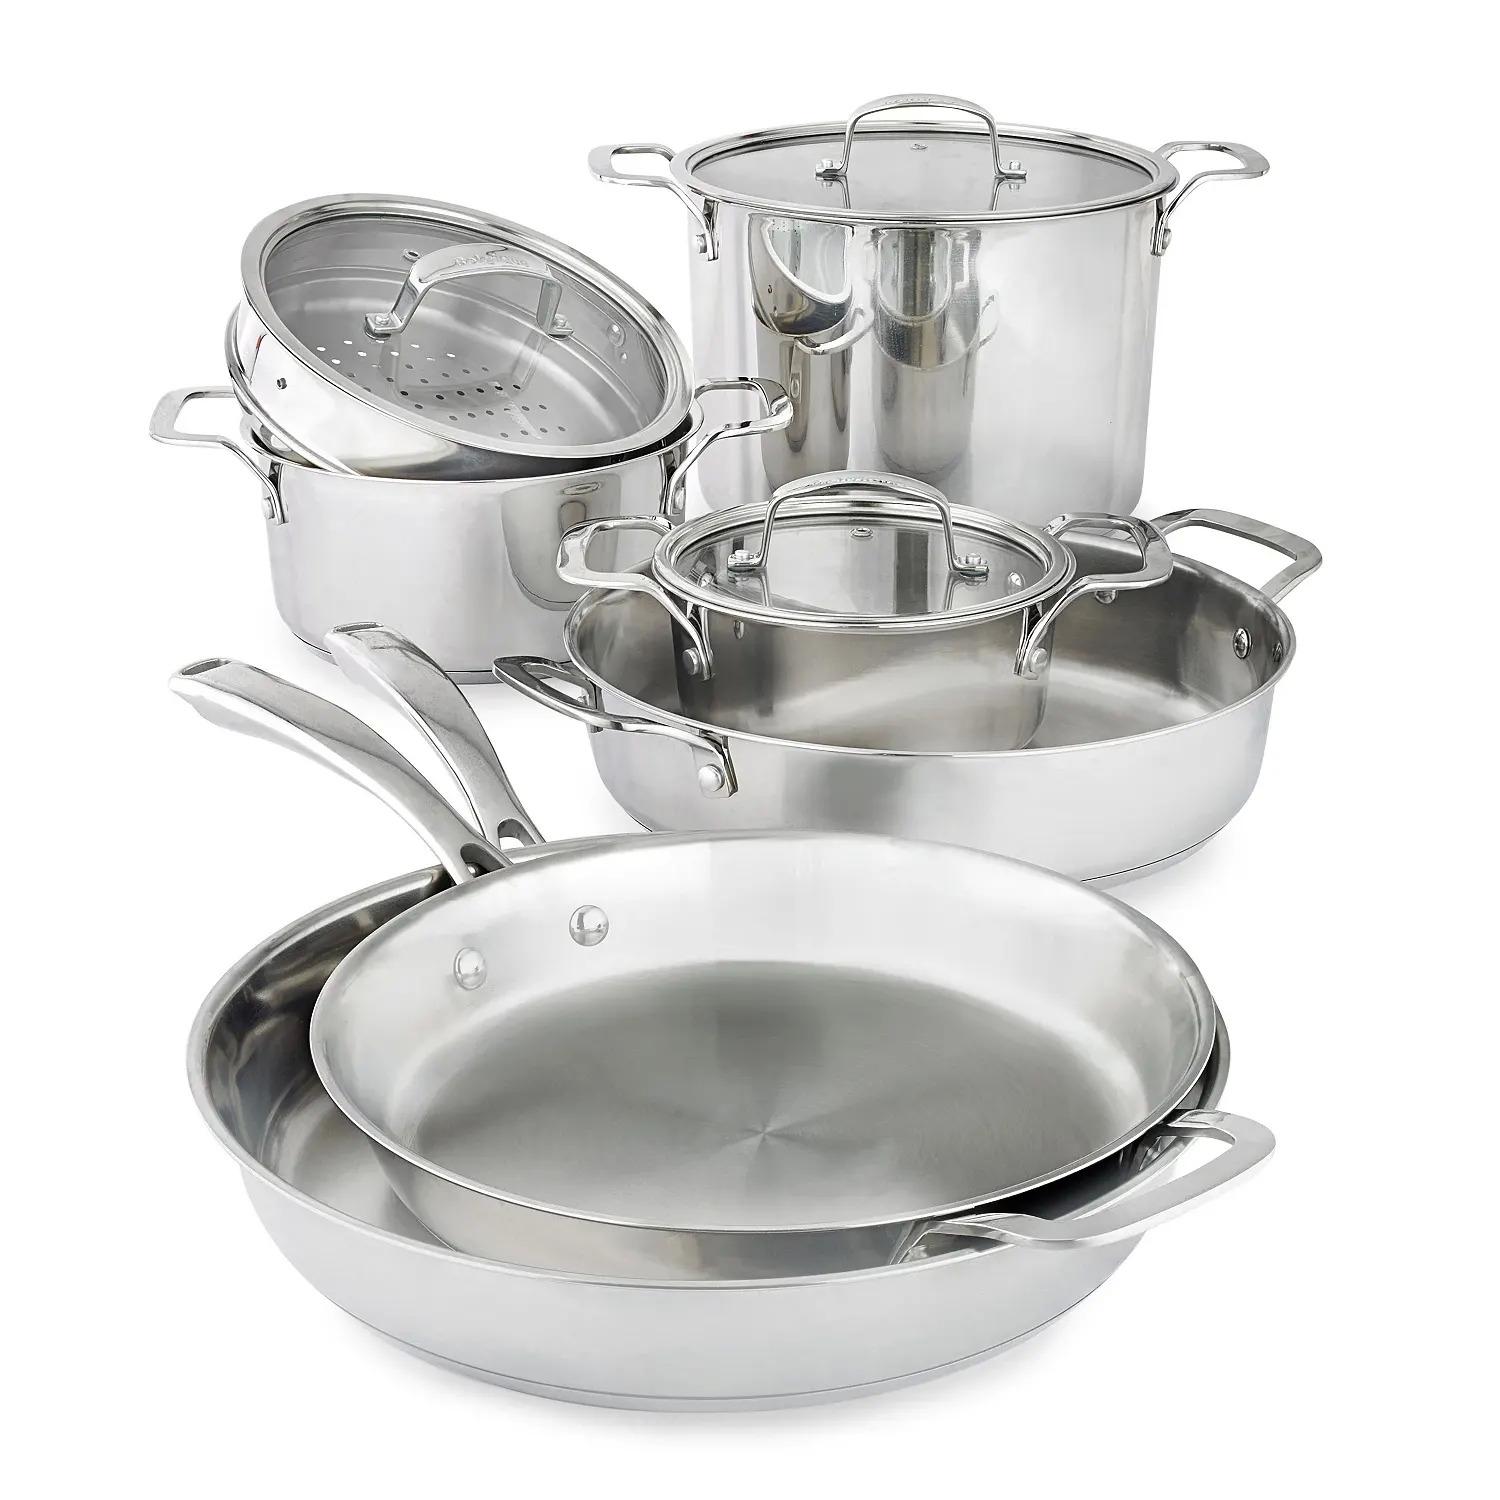 10-Piece Belgique Stackable Stainless Steel Cookware Set for $75.99 Shipped